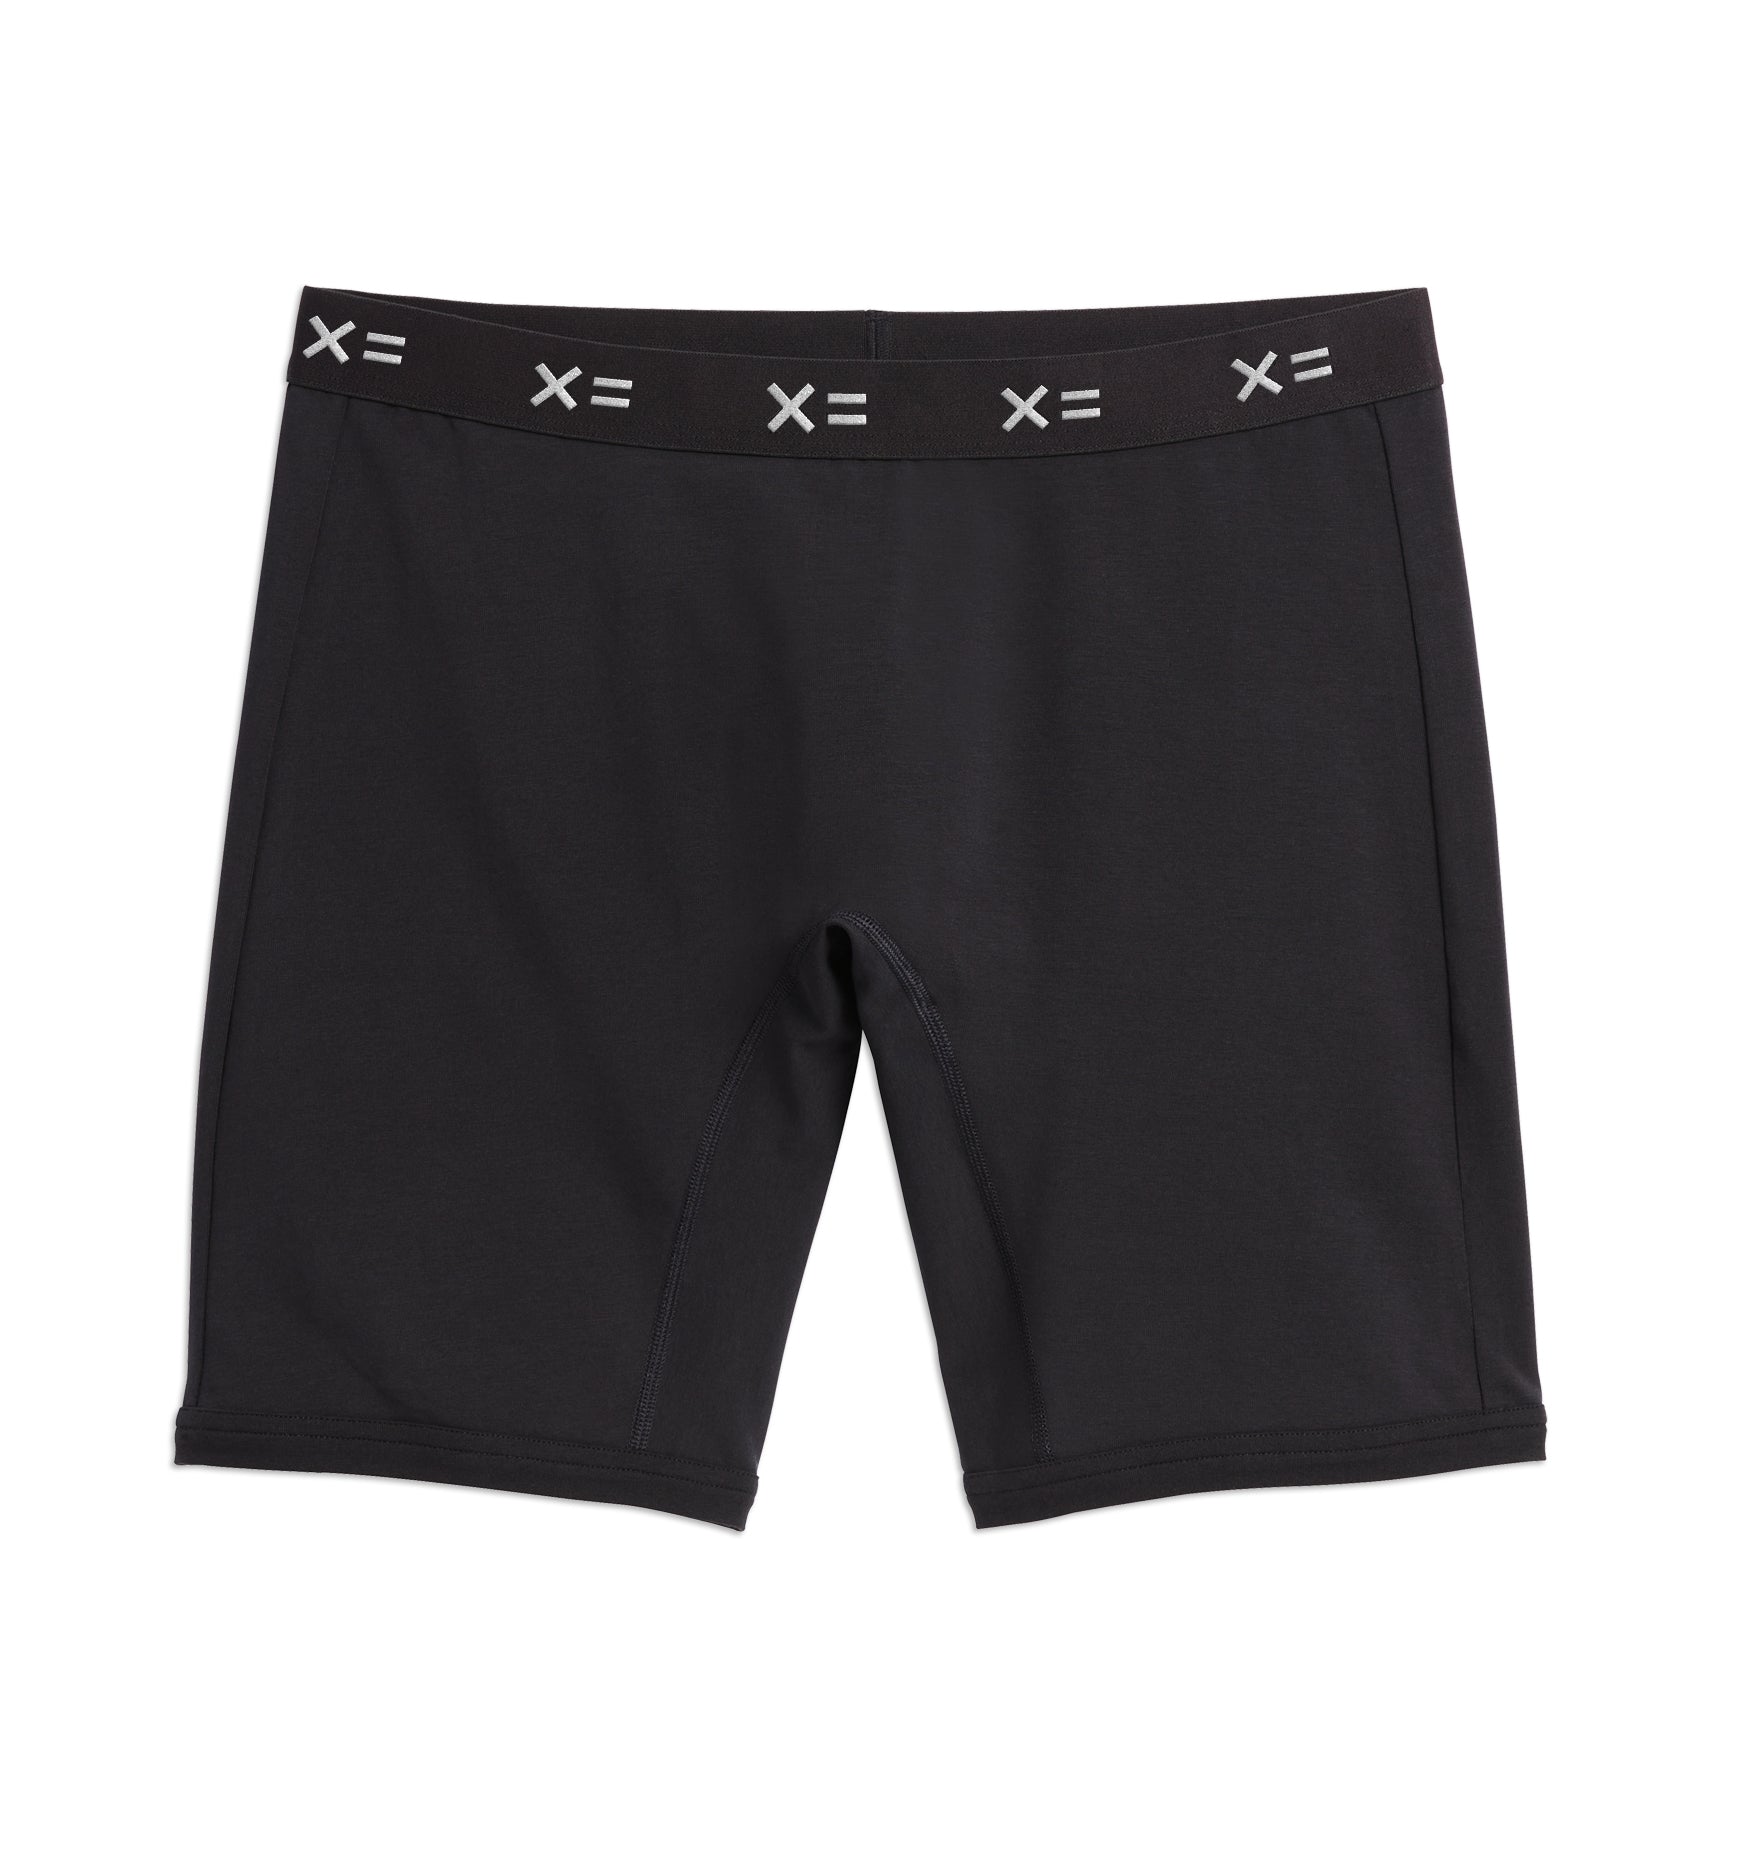 9 Inch Boxer Briefs  TomboyX - Comfortable, Soft, Breathable